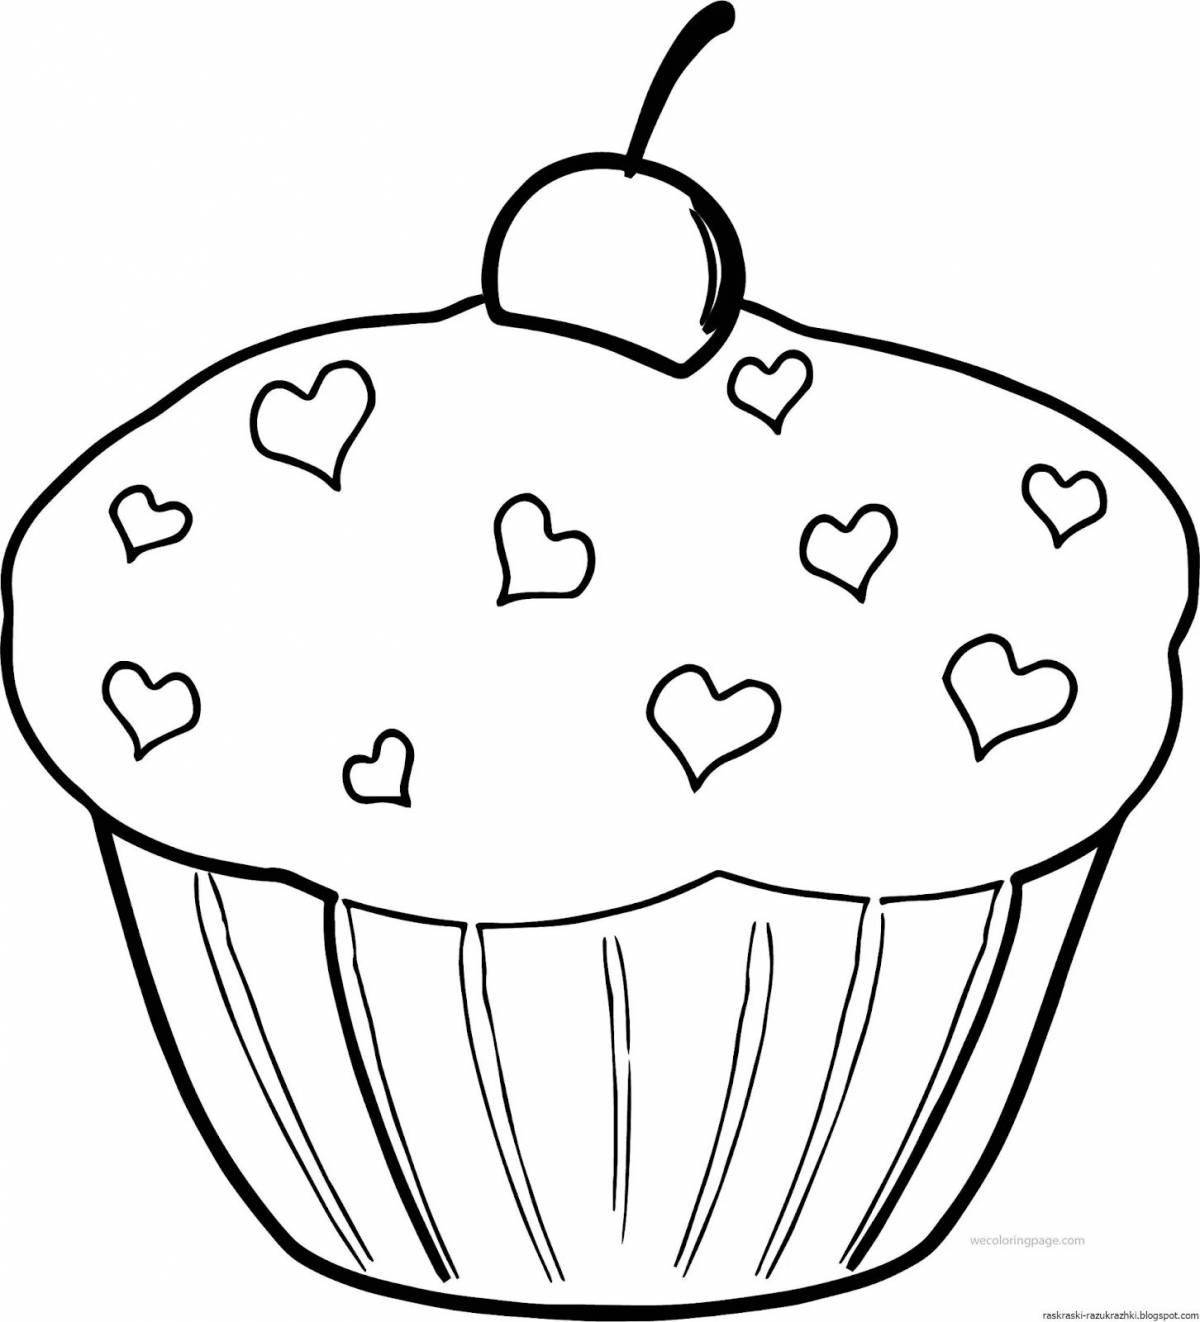 Coloring book appetizing sweets